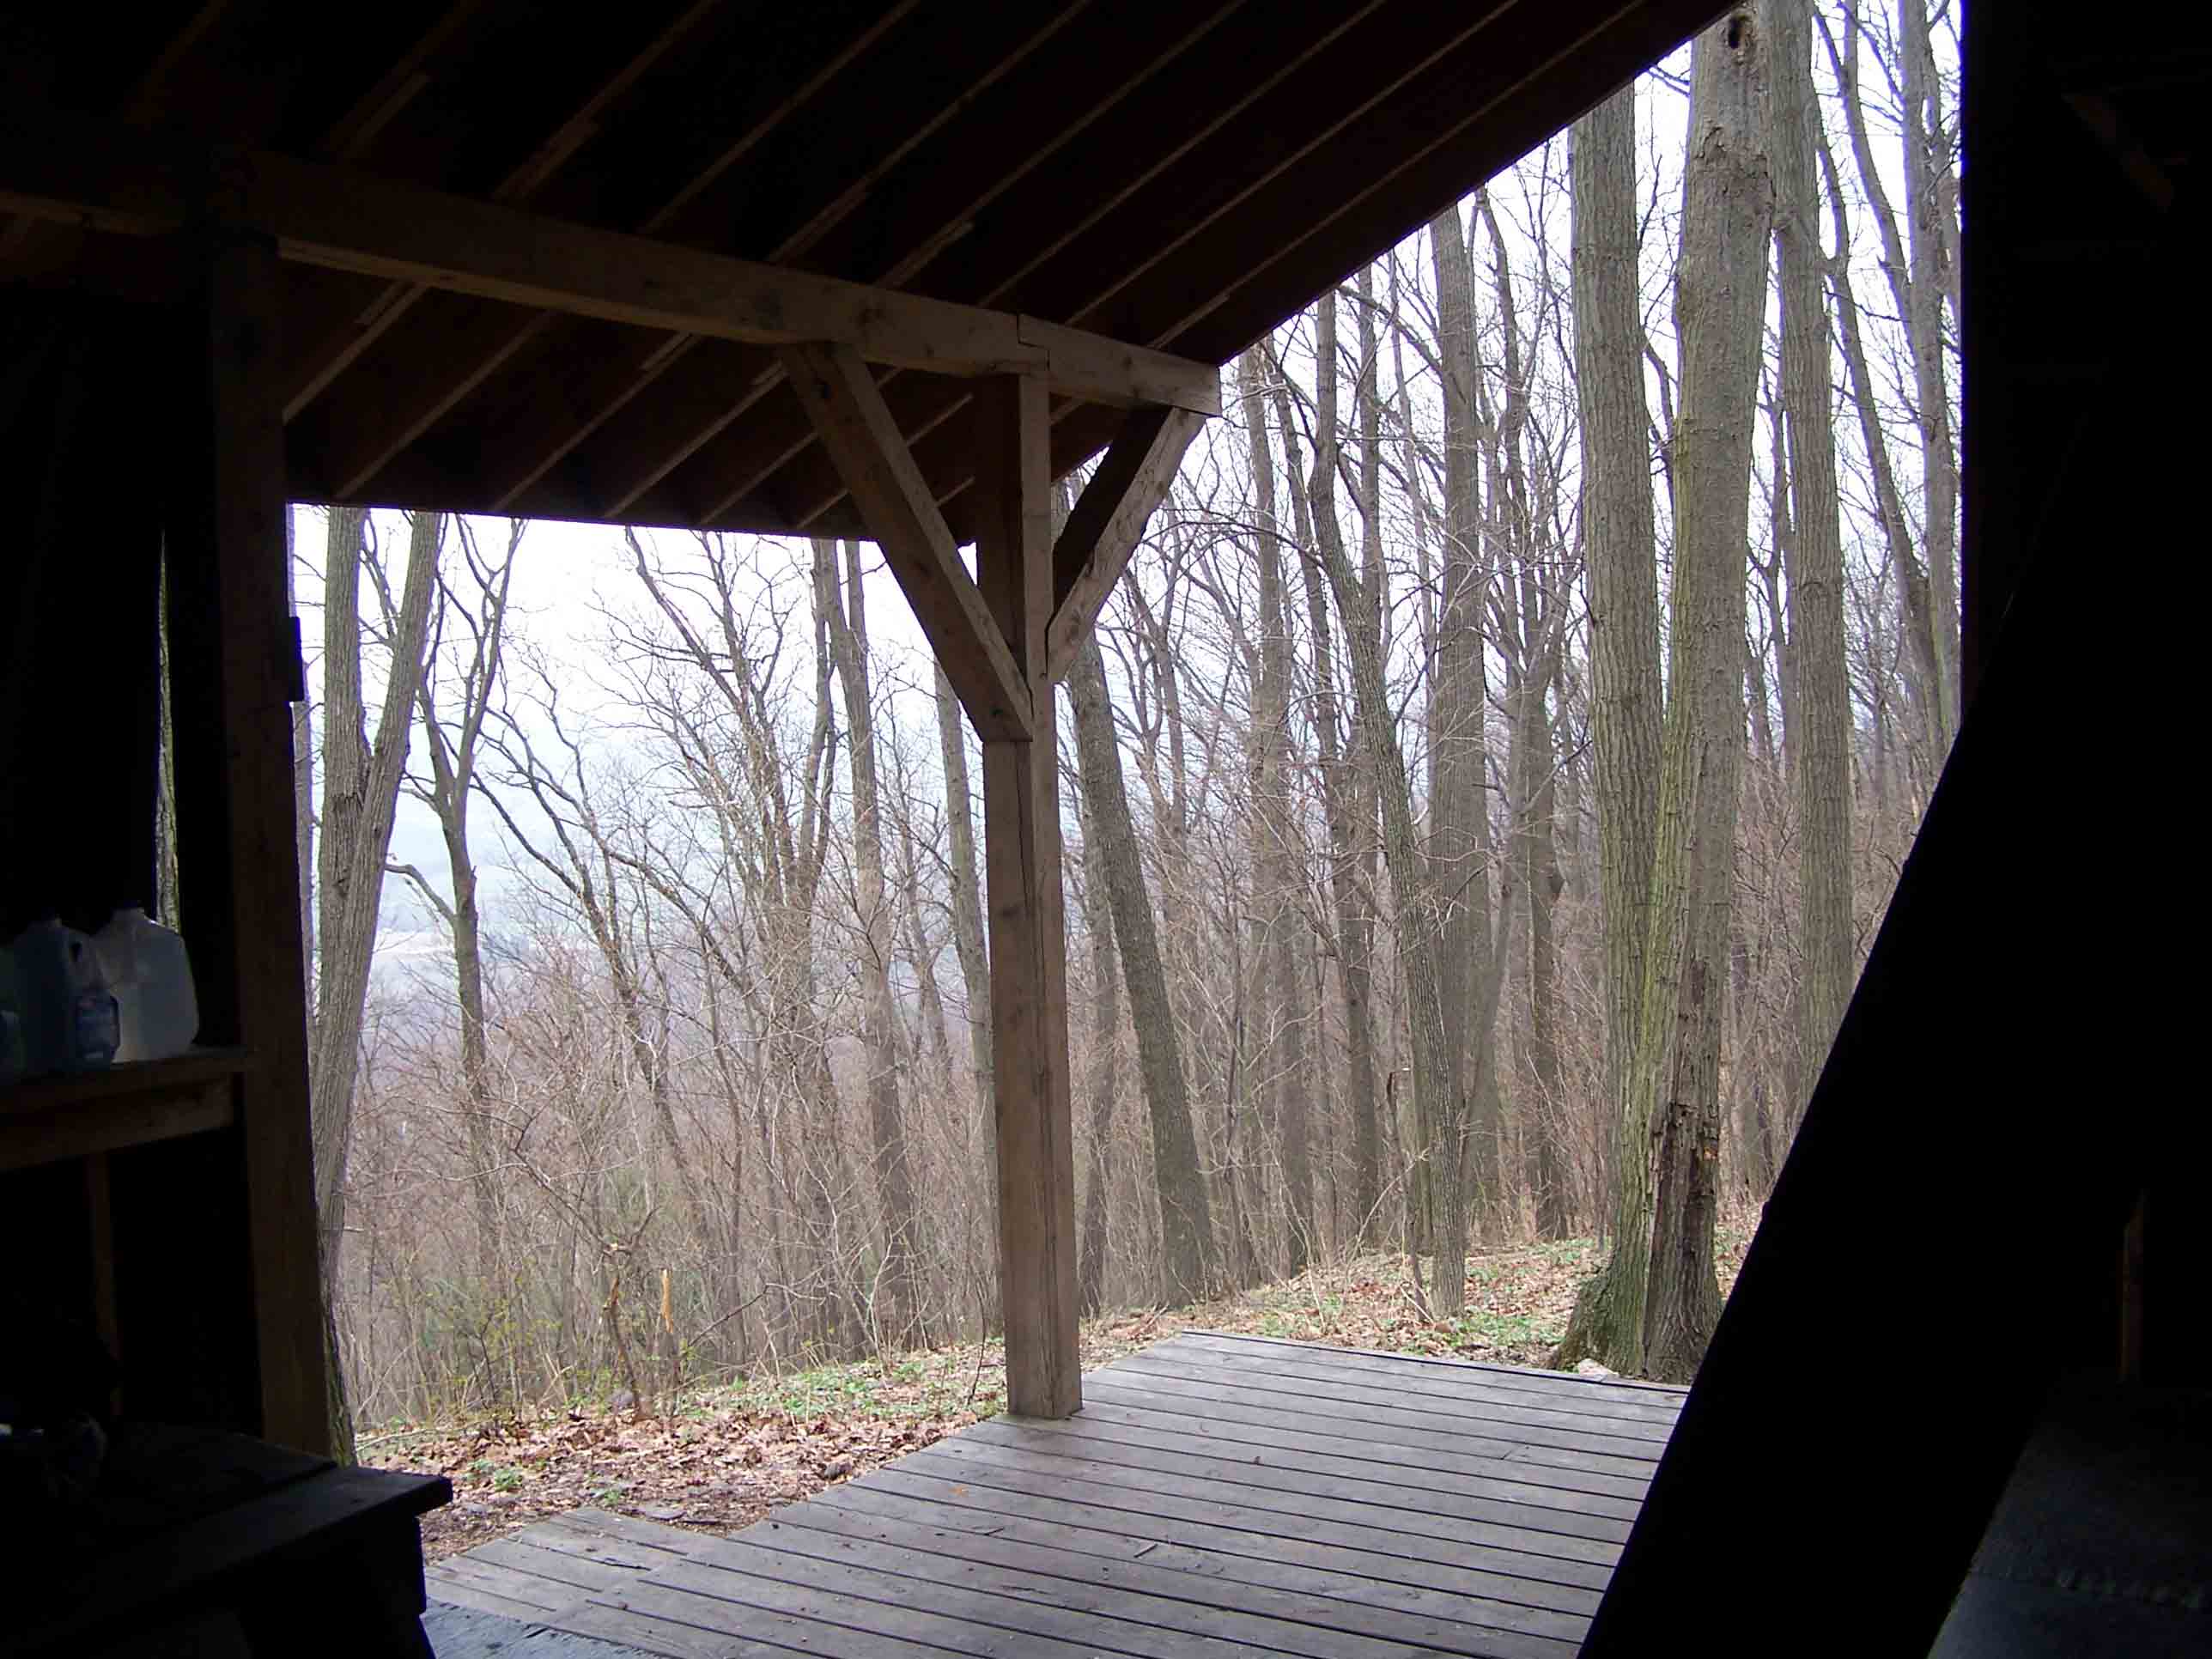 mm 6.7: Peters Mountain Shelter. Courtesy at@rohland.org